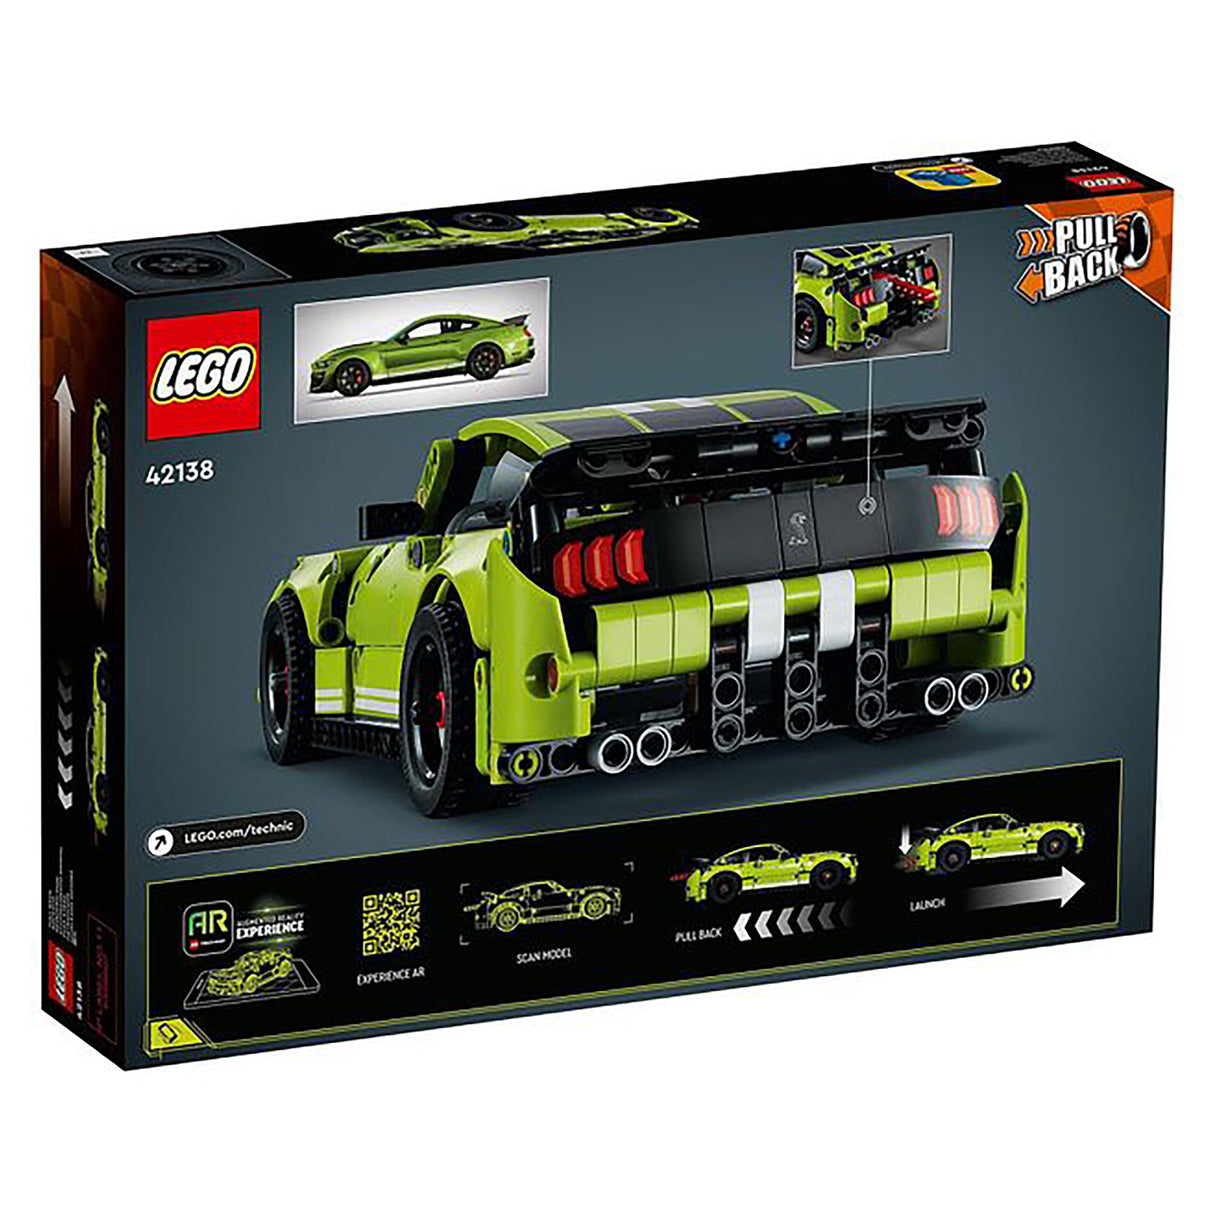 LEGO Technic Ford Mustang Shelby GT500 42138 (544 pieces)